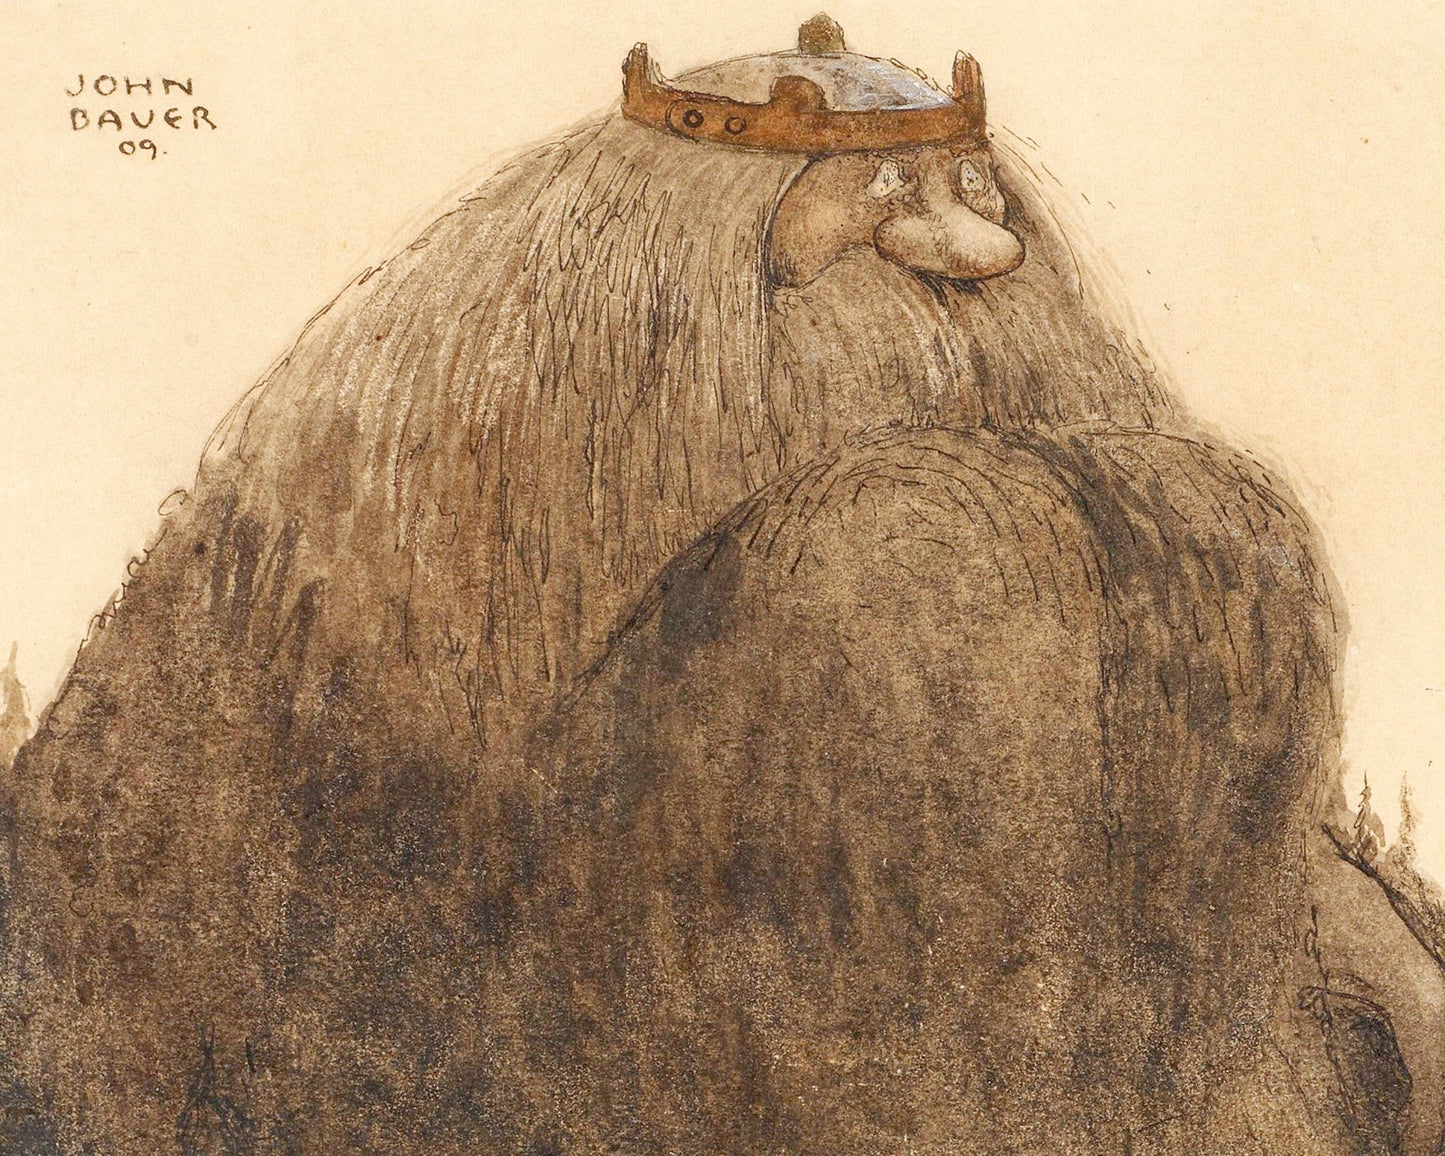 John Bauer "King of The Hill" (c.1909) - Mabon Gallery